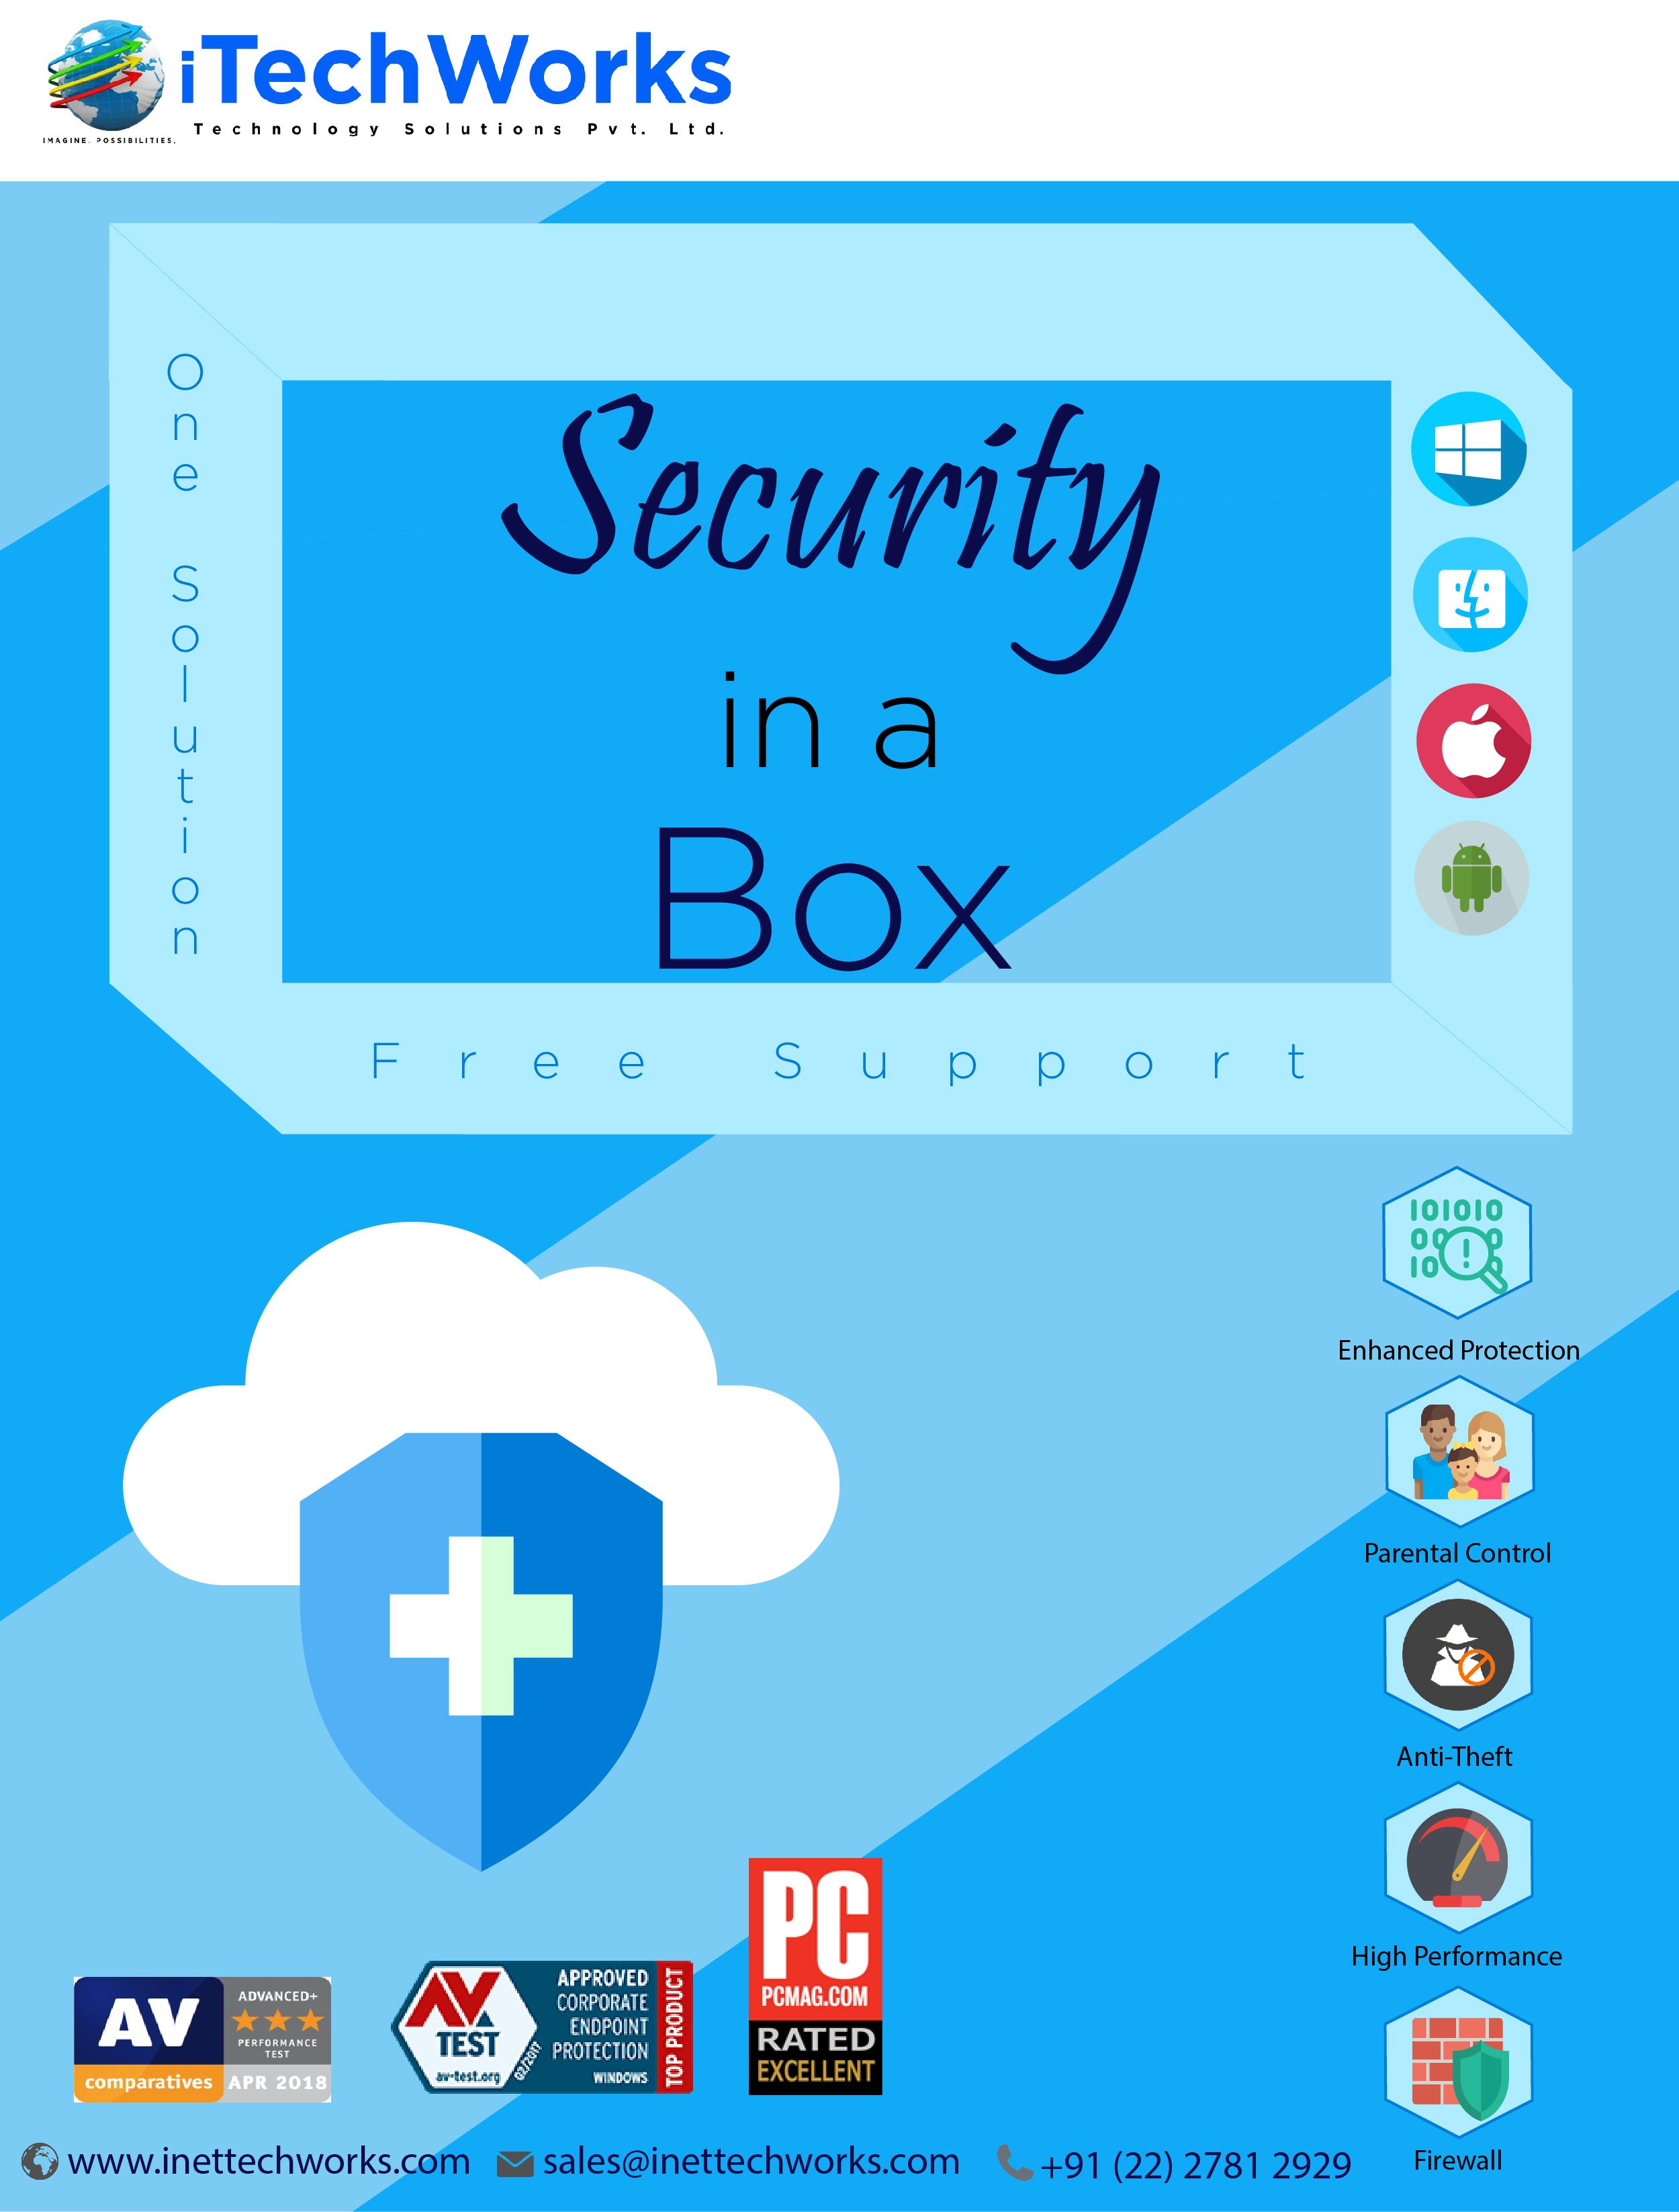 Security in a box